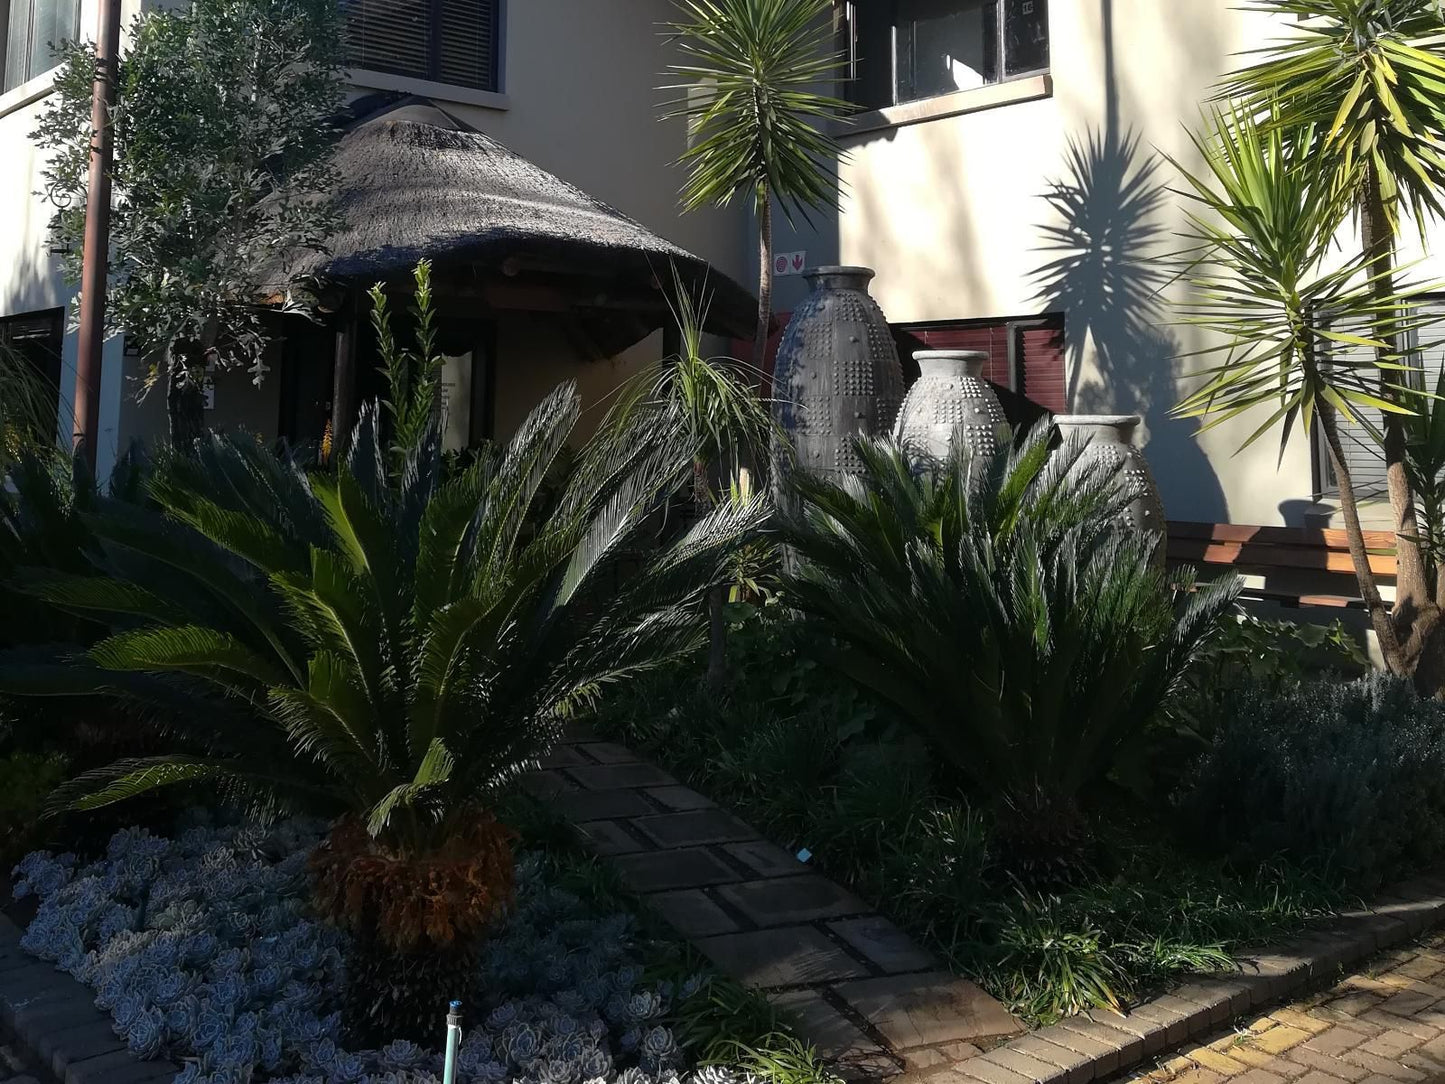 Monte Christo Country Lodge Spitskop Bloemfontein Free State South Africa House, Building, Architecture, Palm Tree, Plant, Nature, Wood